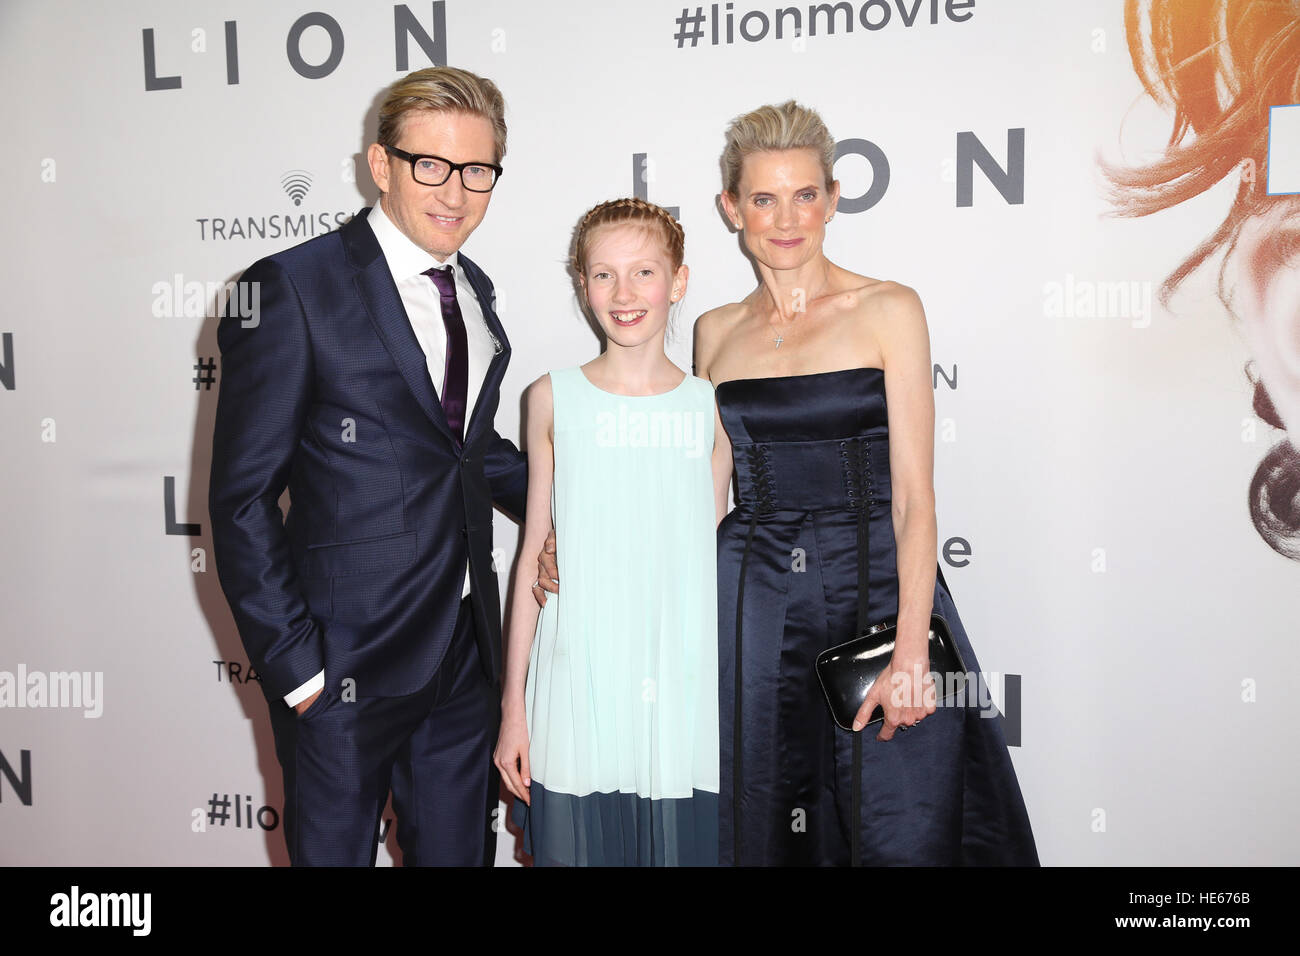 Sydney, Australia. 19 December 2016. Pictured: David Wenham, Kate Agnew, Eliza Jane Wenham. The cast and crew of LION arrived on the red carpet for the Australian premiere at the Theatre